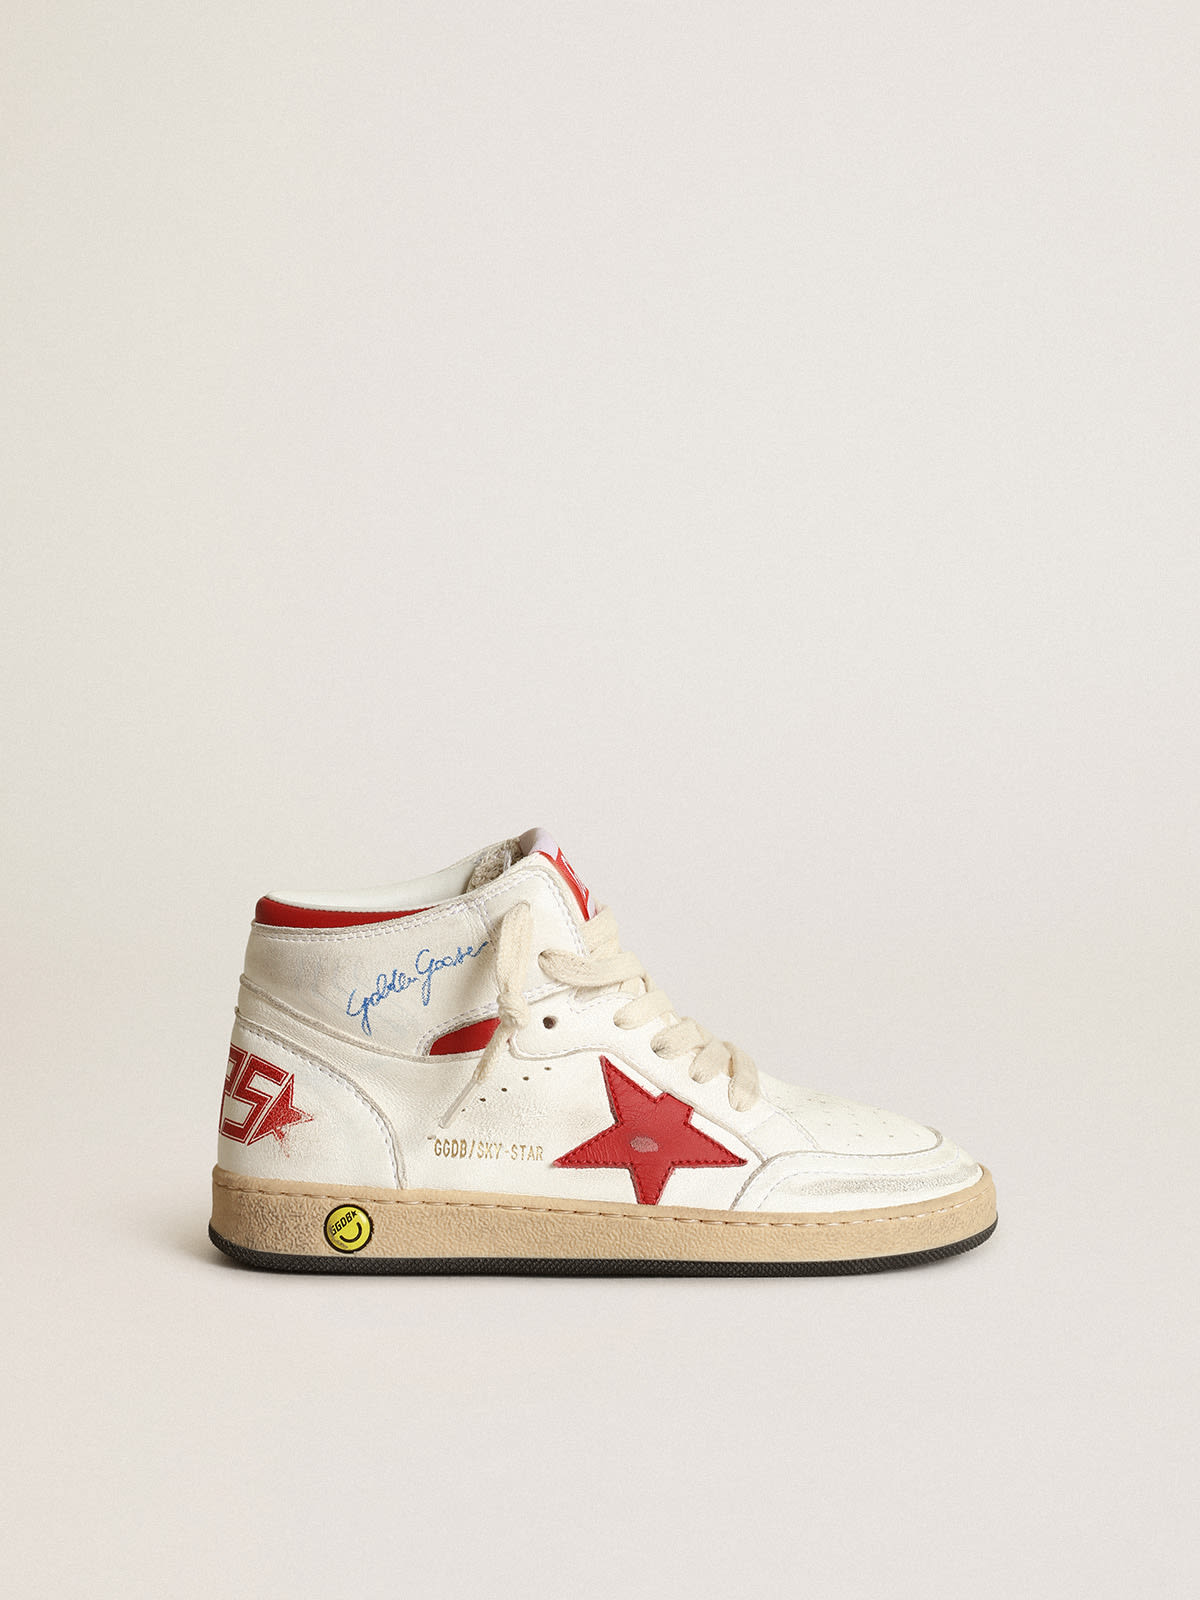 Golden Goose - Young Sky-Star sneakers in white nappa leather with red leather star and heel tab in 